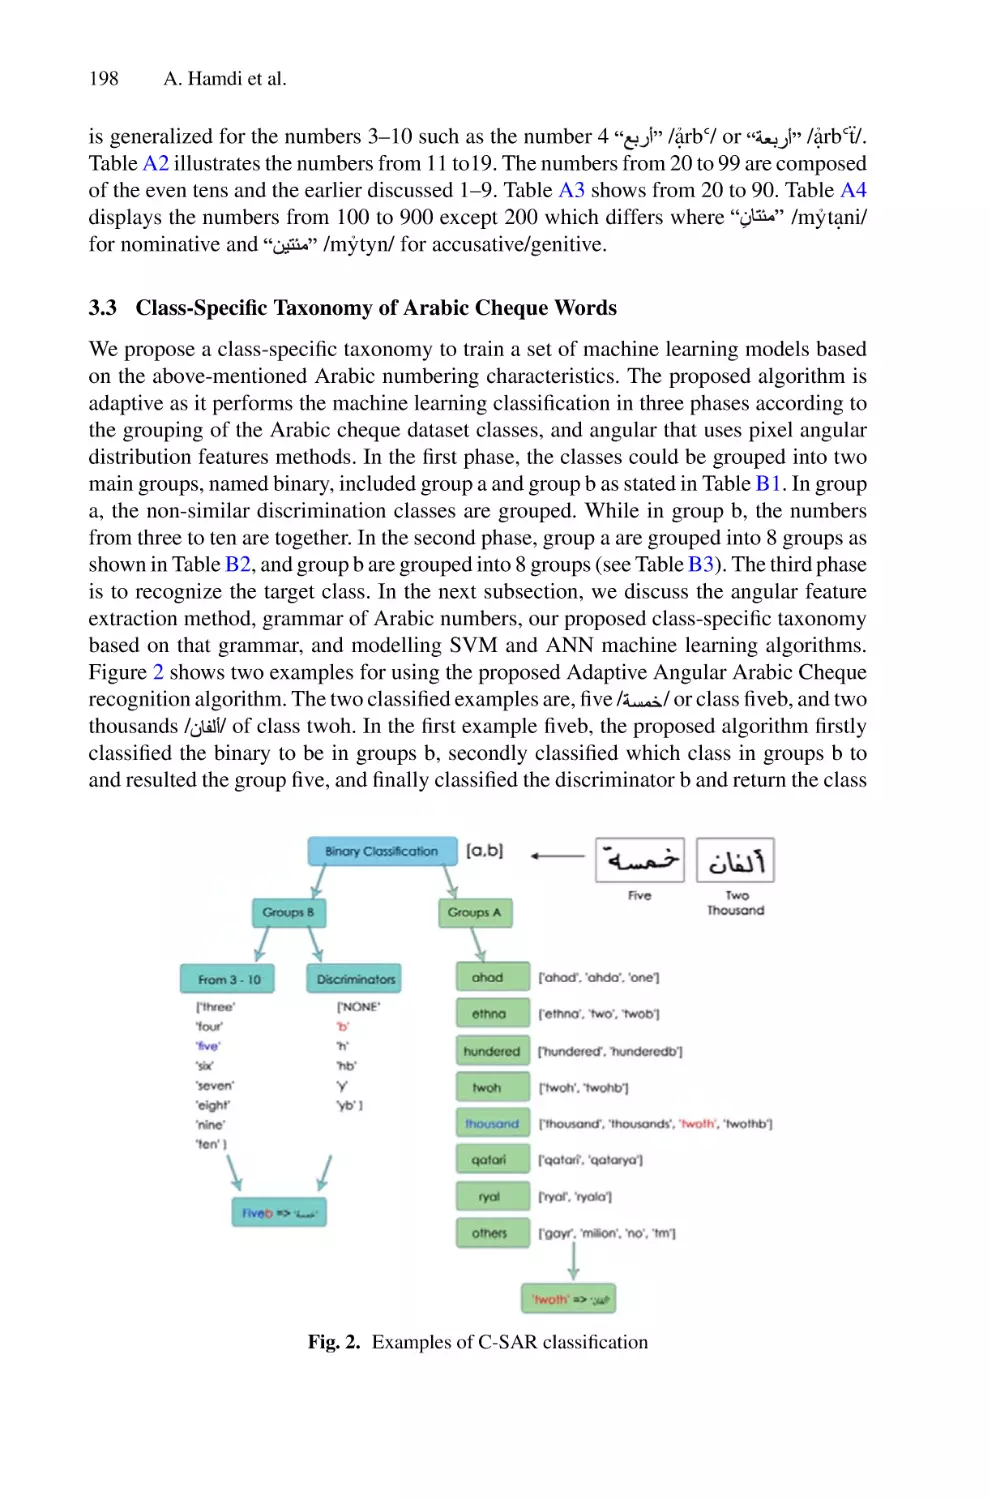 3.3 Class-Specific Taxonomy of Arabic Cheque Words